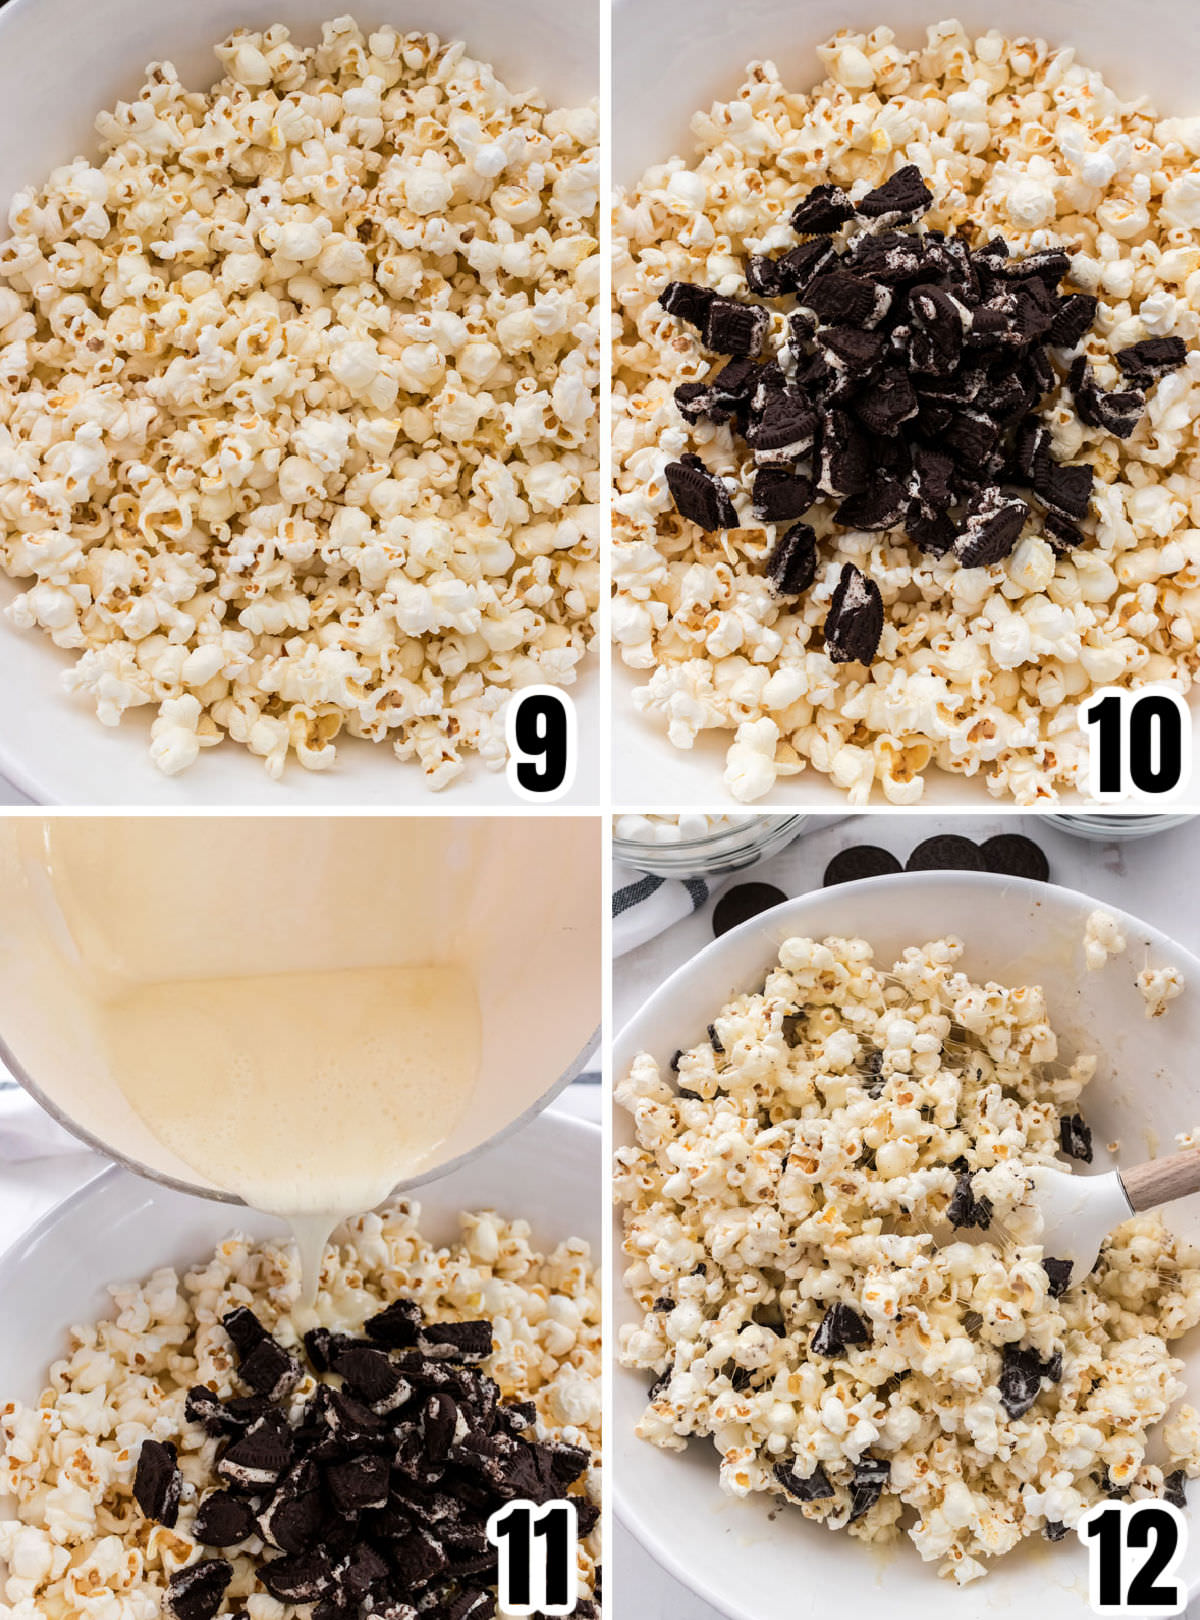 Collage image showing how to cover the popcorn in the marshmallow mixture.